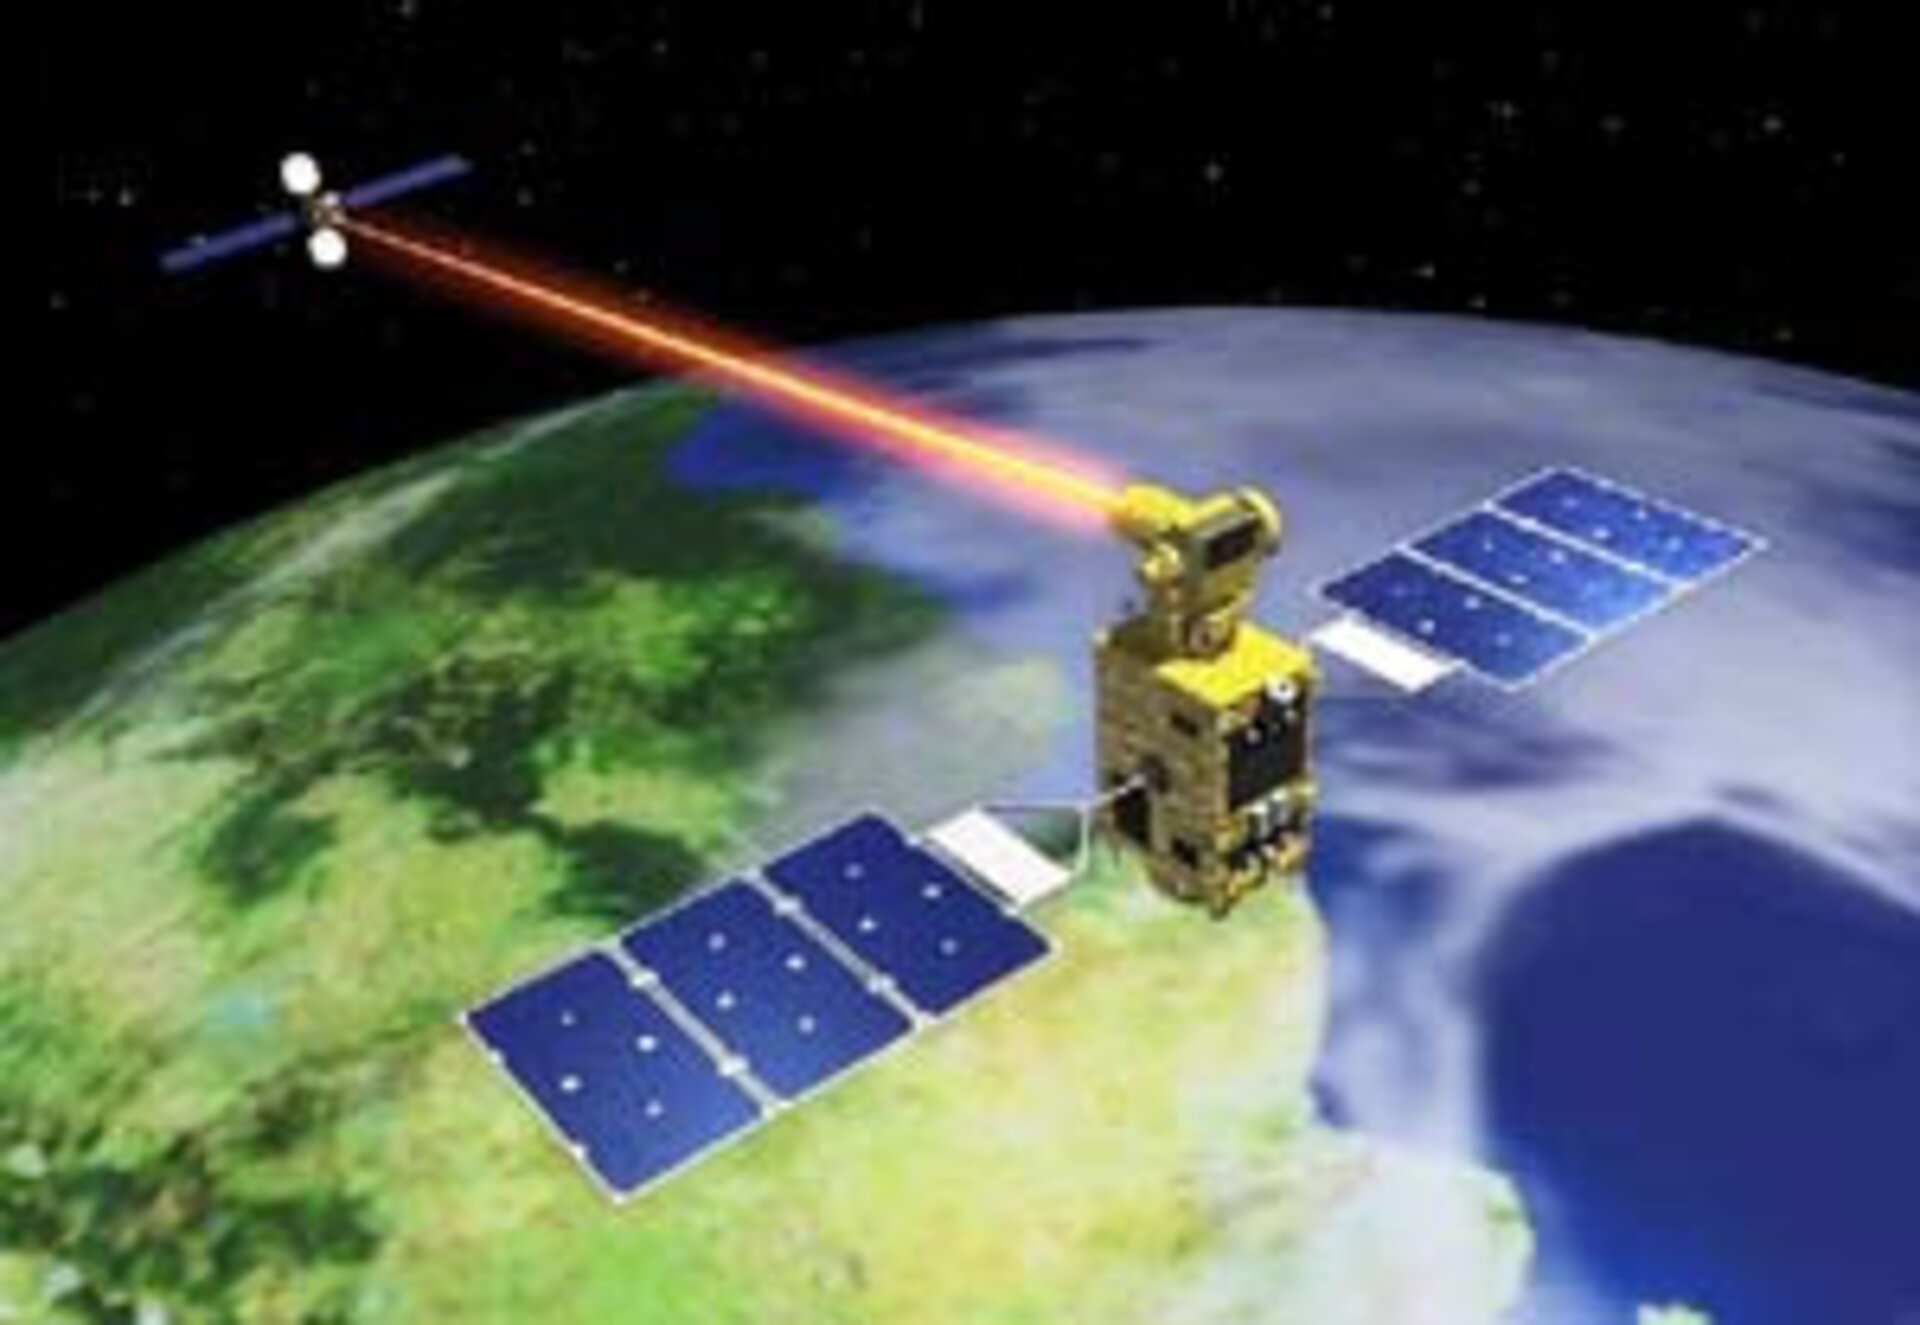 The OICETS satellite